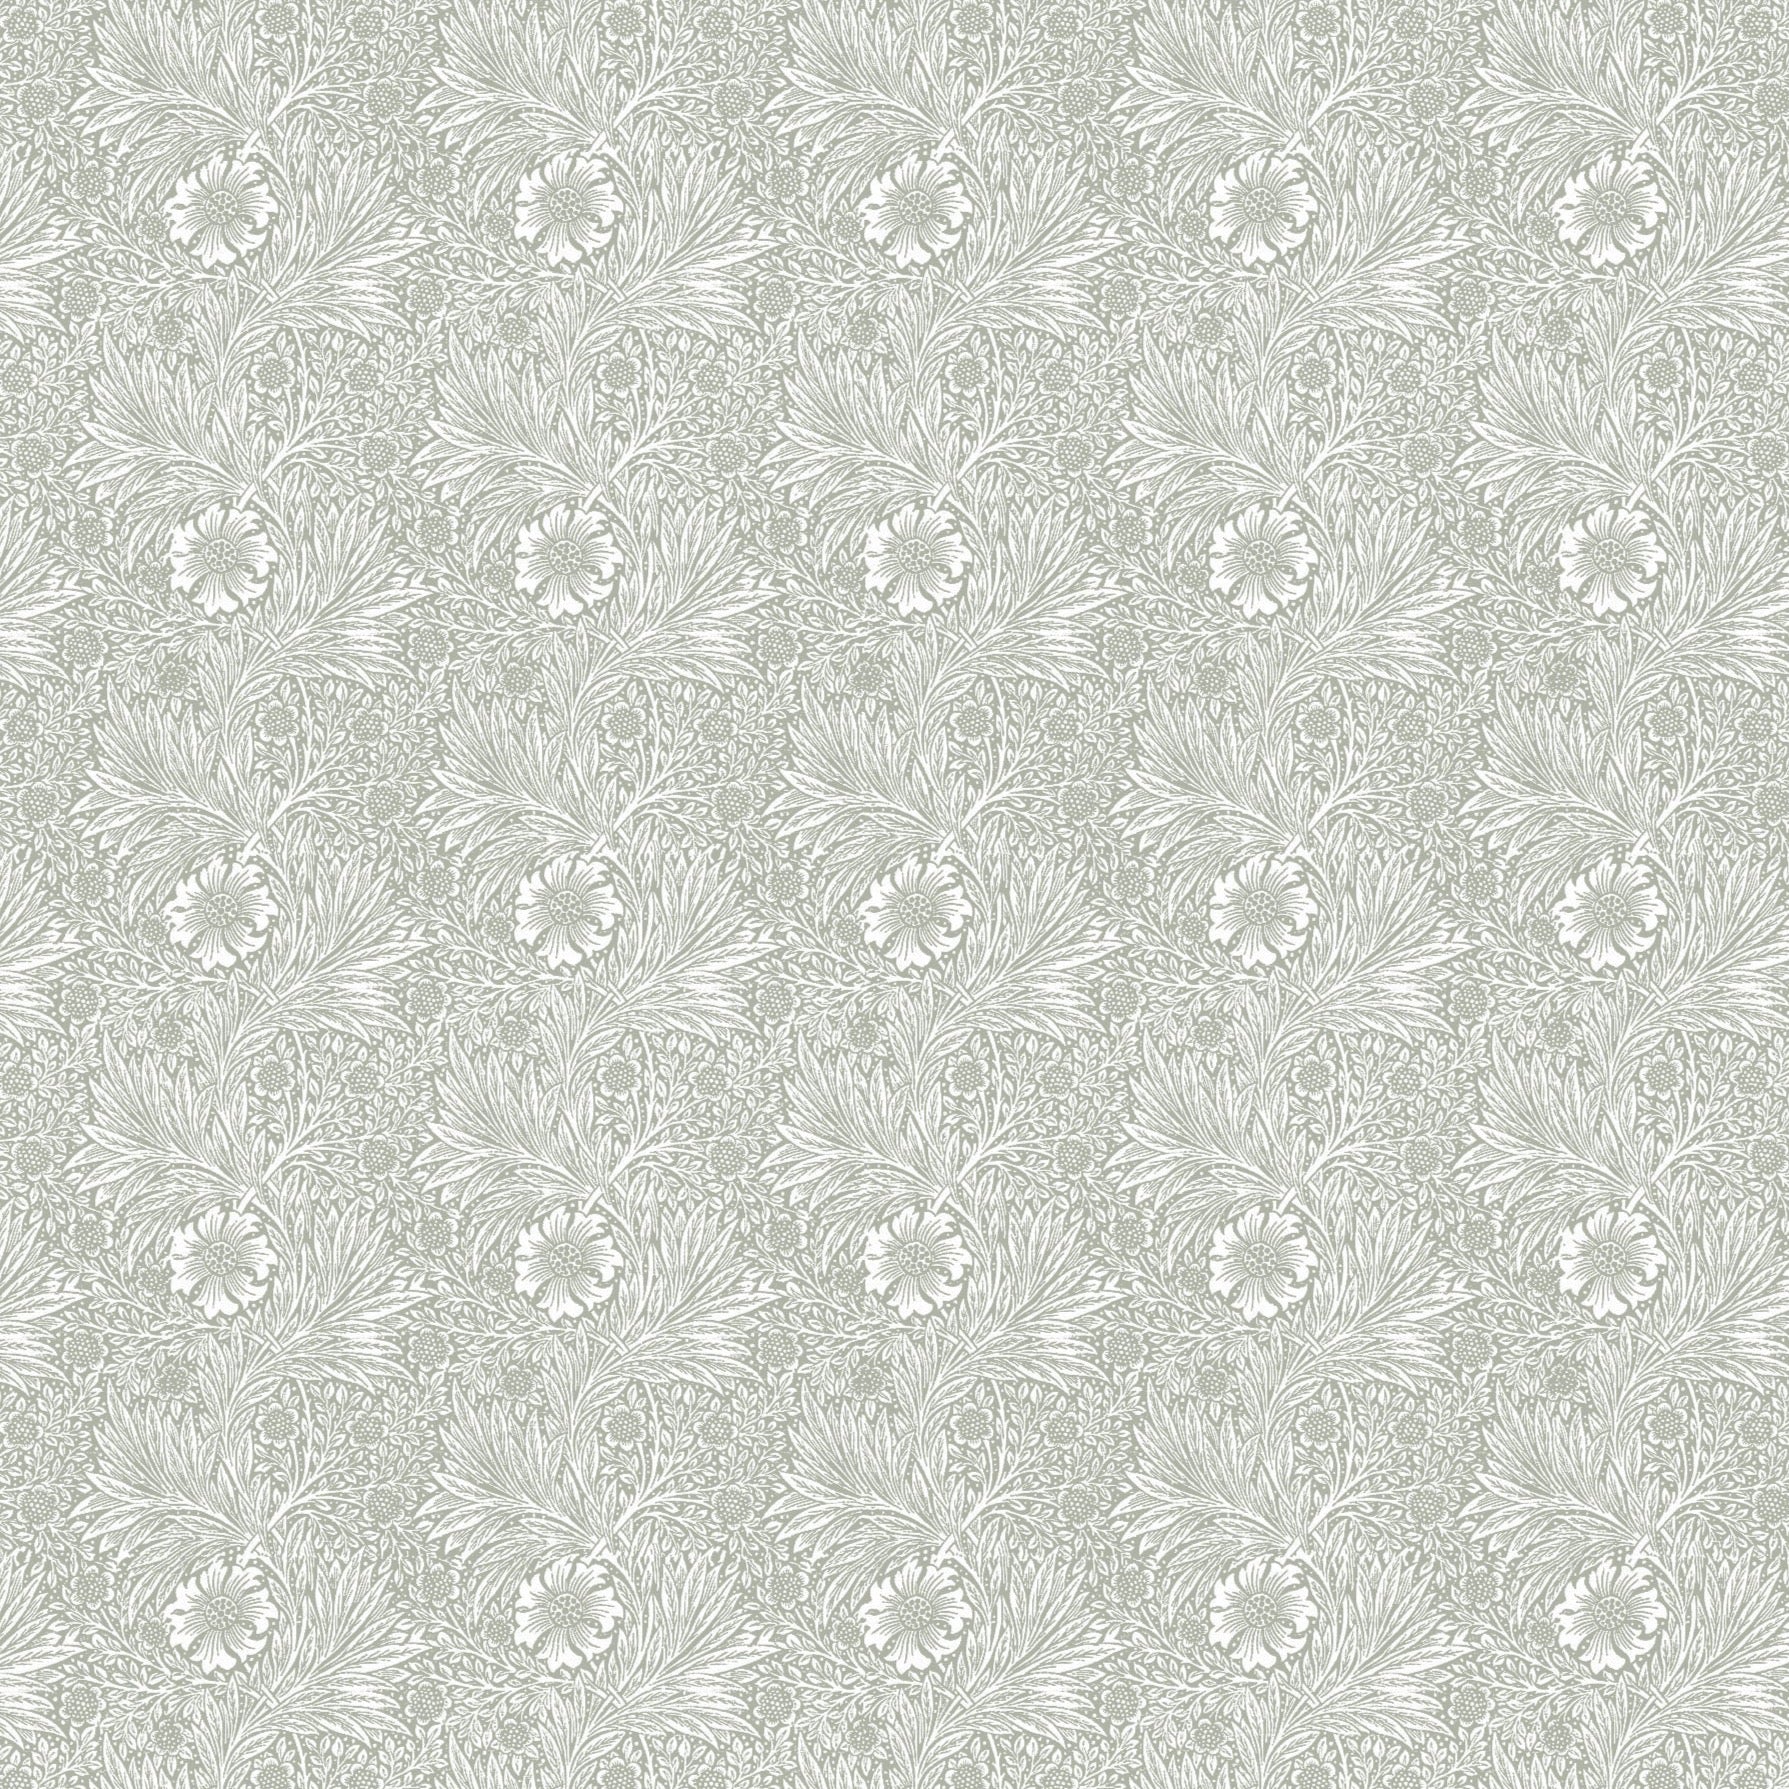 Close-up of Olive Timeless Floral Wallpaper displaying a detailed floral design in olive green and soft gray, ideal for adding a touch of traditional elegance to any room